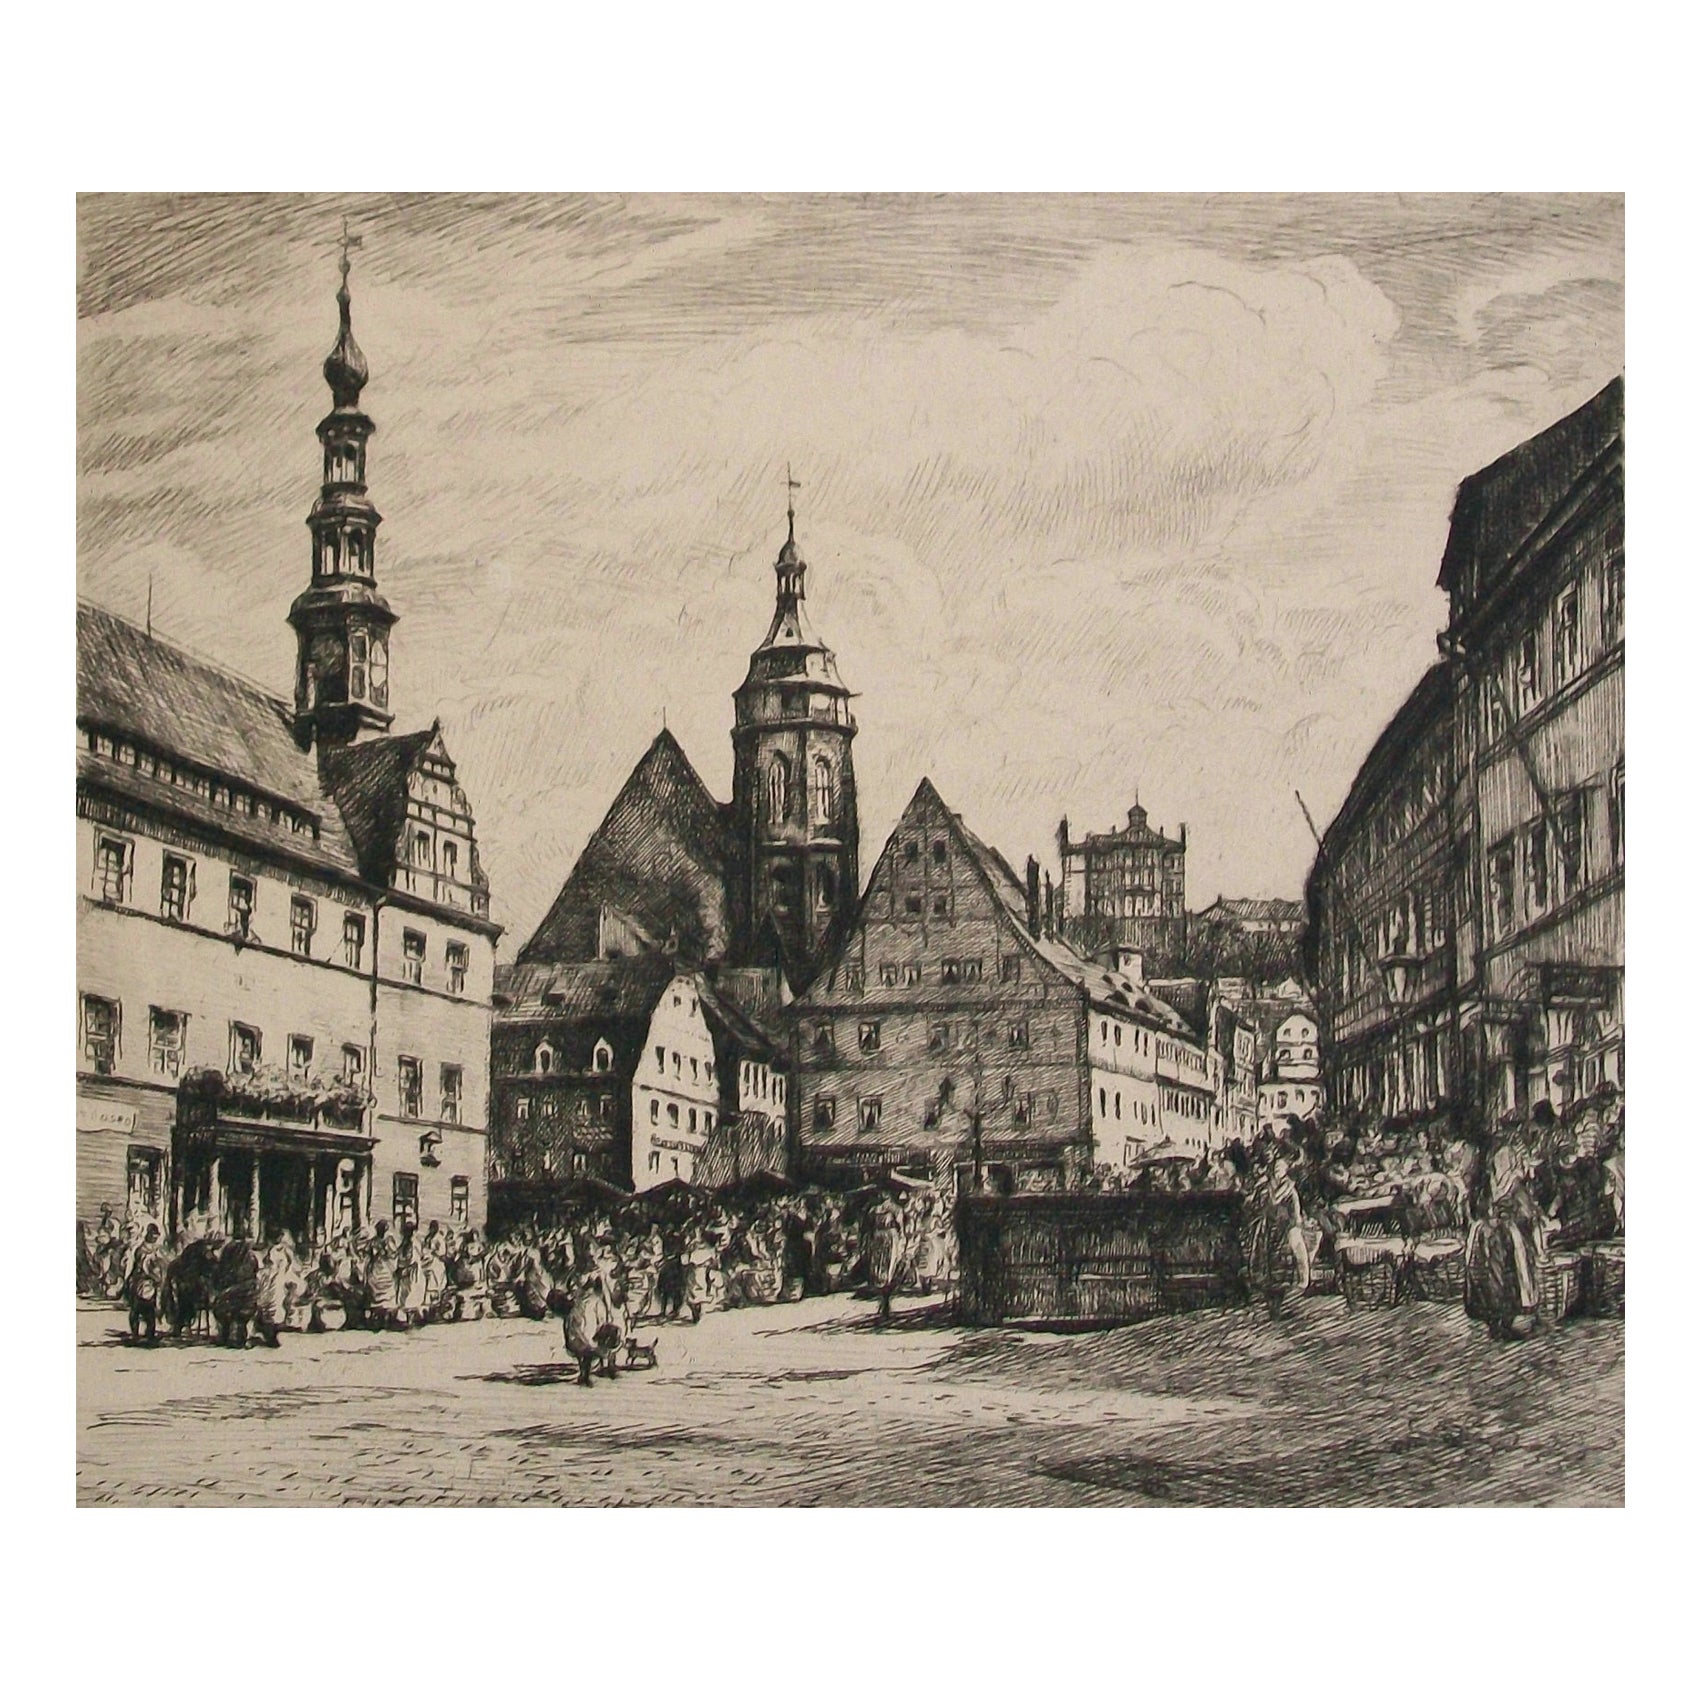 'The Market Square at Pirna' - Antique Engraving - Germany - 18th/19th Century